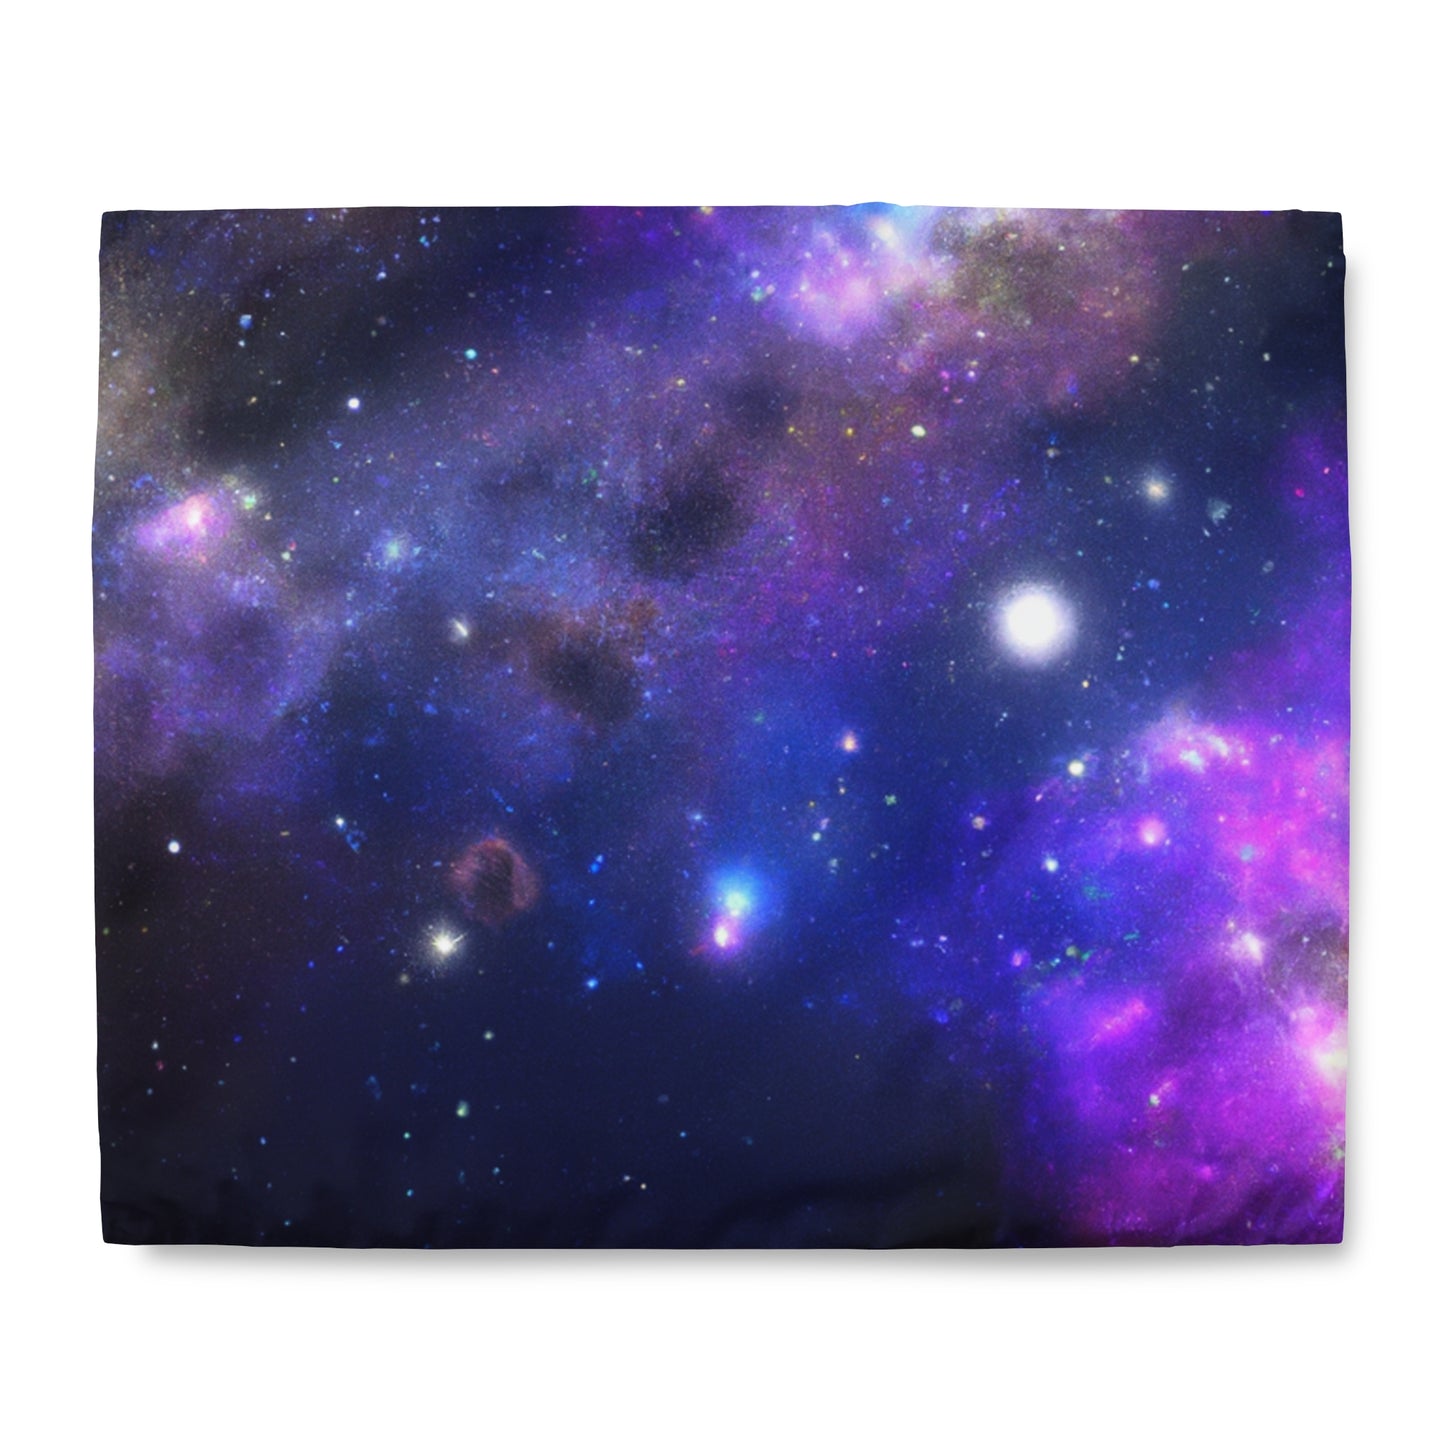 The Dream of Silver Stardust - Astronomy Duvet Bed Cover